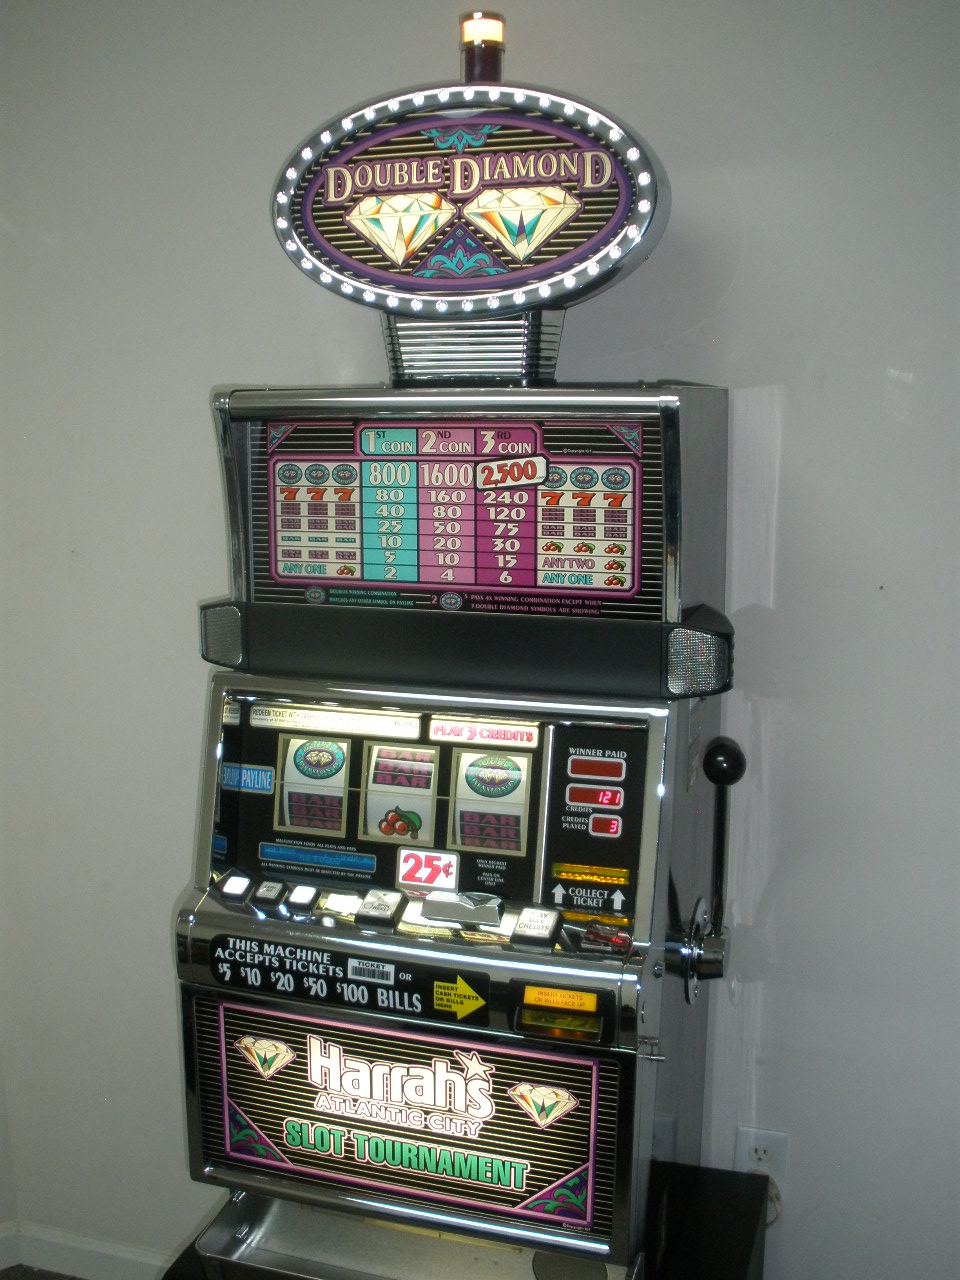 http://www.gamblersoasisusa.com/Shared/Images/Product/IGT-DOUBLE-DIAMOND-S2000-QUARTER-COIN-HANDLING-WITH-LIGHTED-TOPPER-FLAT-TOP-HARRAH-S-SLOT-TOURNAMENT-BOTTOM/P8100331.jpg